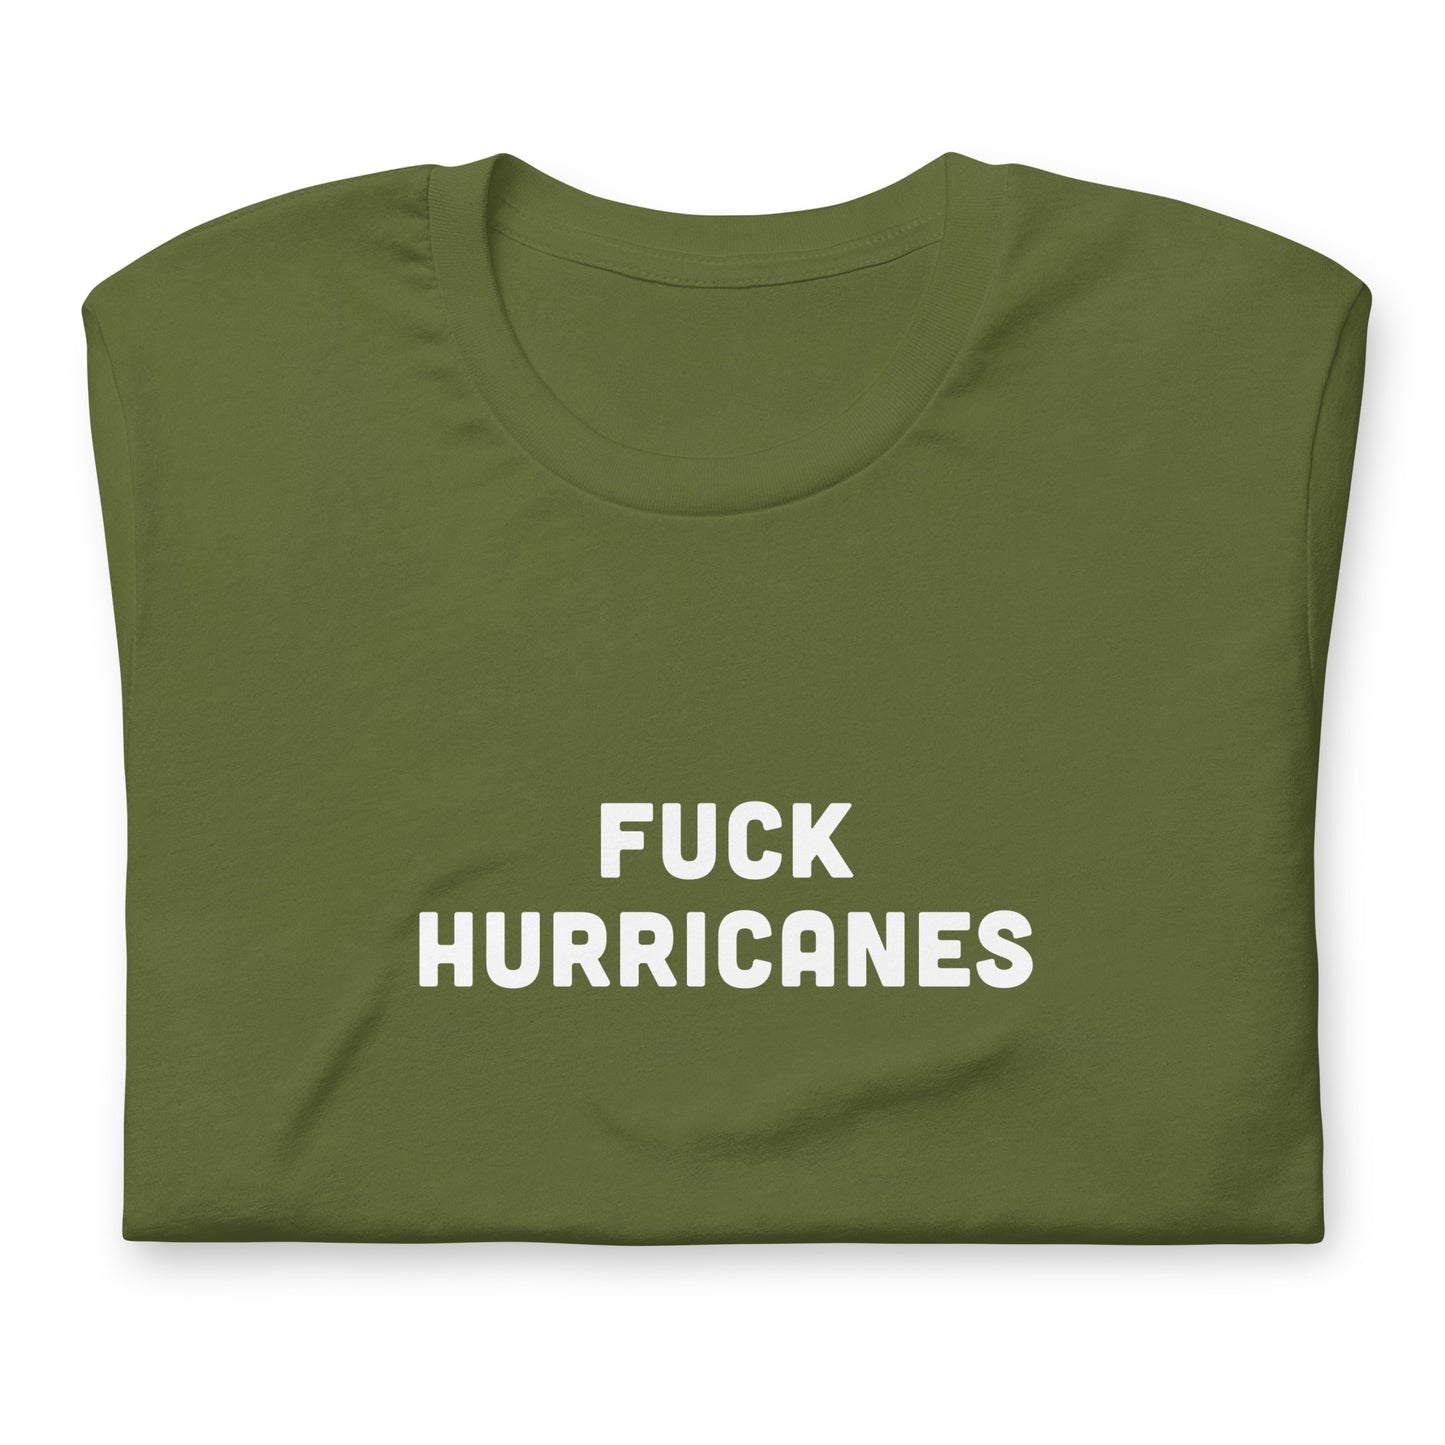 Fuck Hurricanes T-Shirt Size S Color Navy